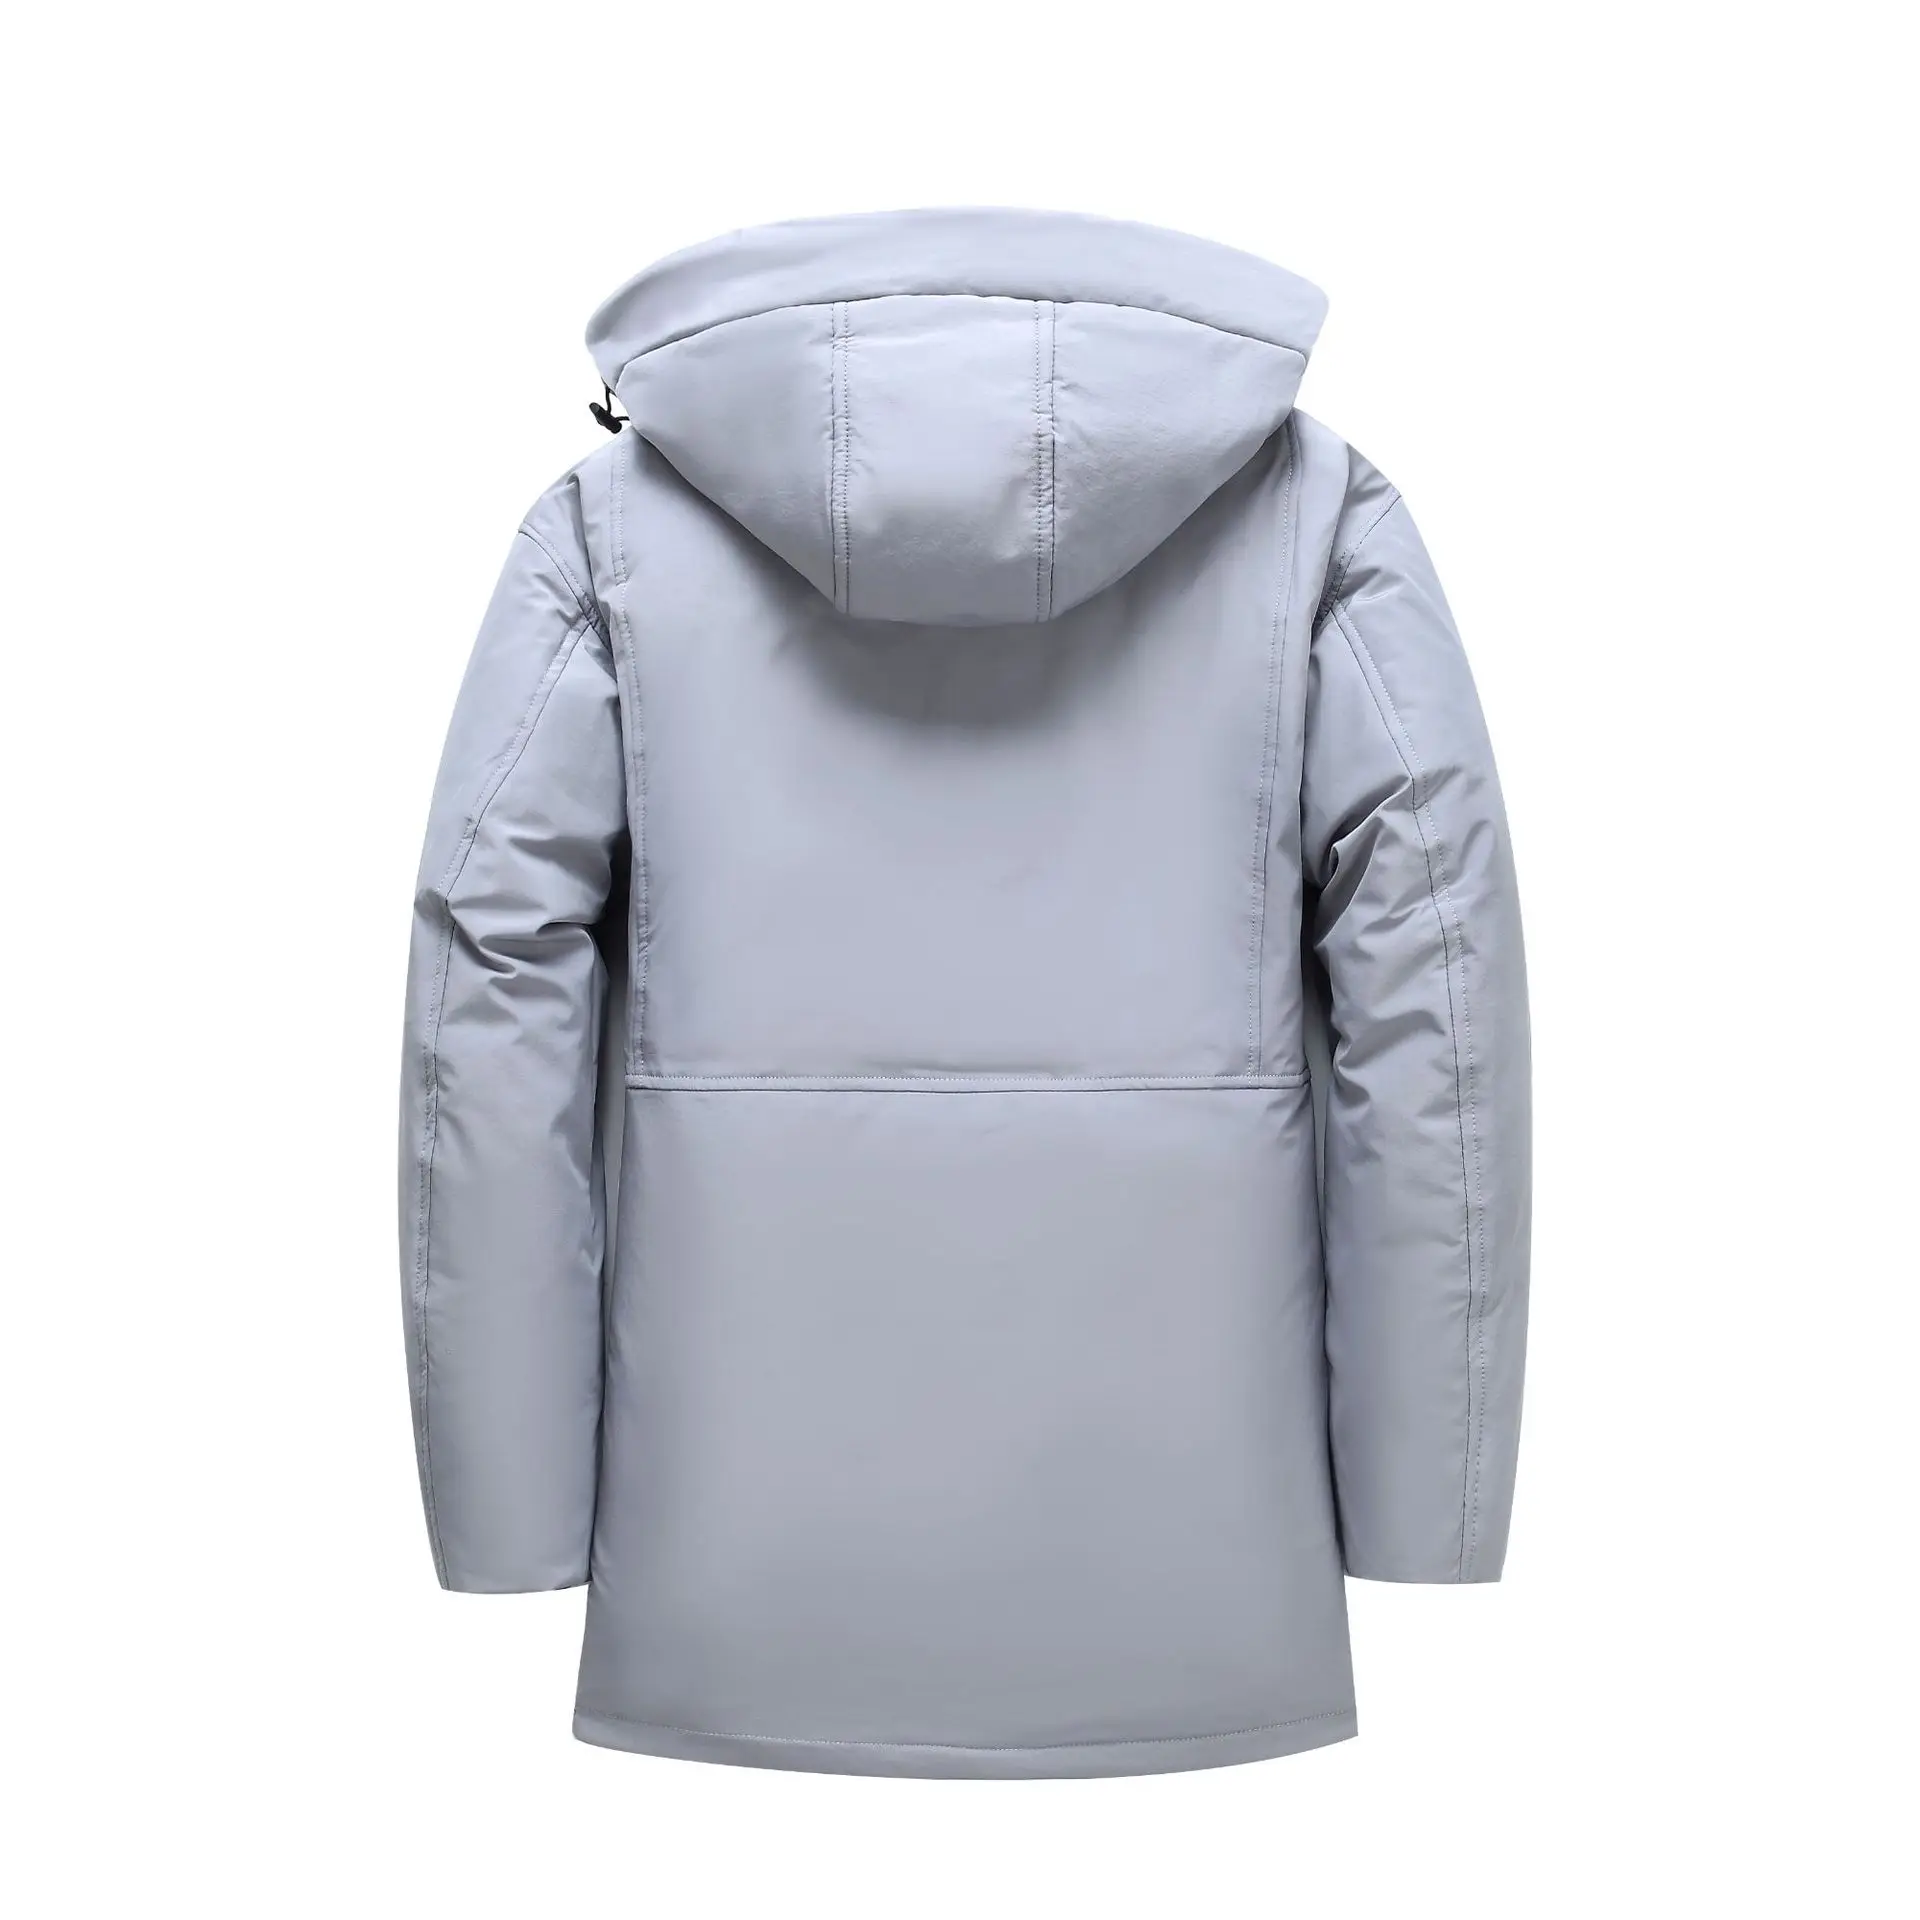 Man Winter Fashion Casual Hooded Thickening Warm  White Duck Down Jacket Upscale Boutique Hooded Down Coat enlarge